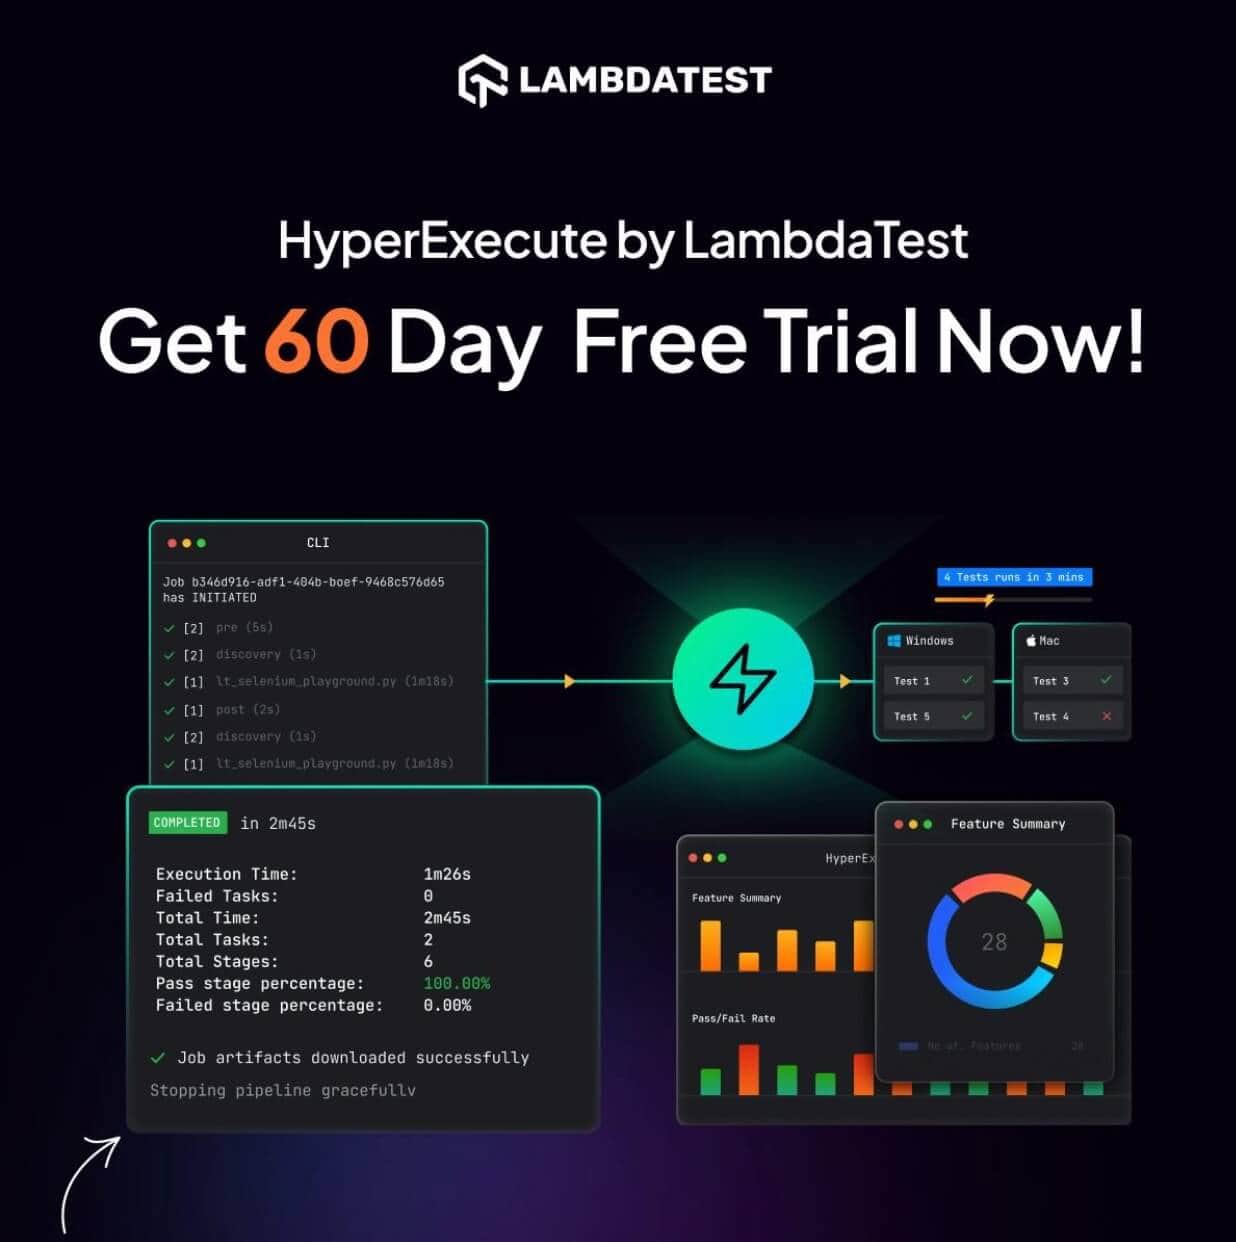 Hyperexec by lambatest offers a 60-day free trial.